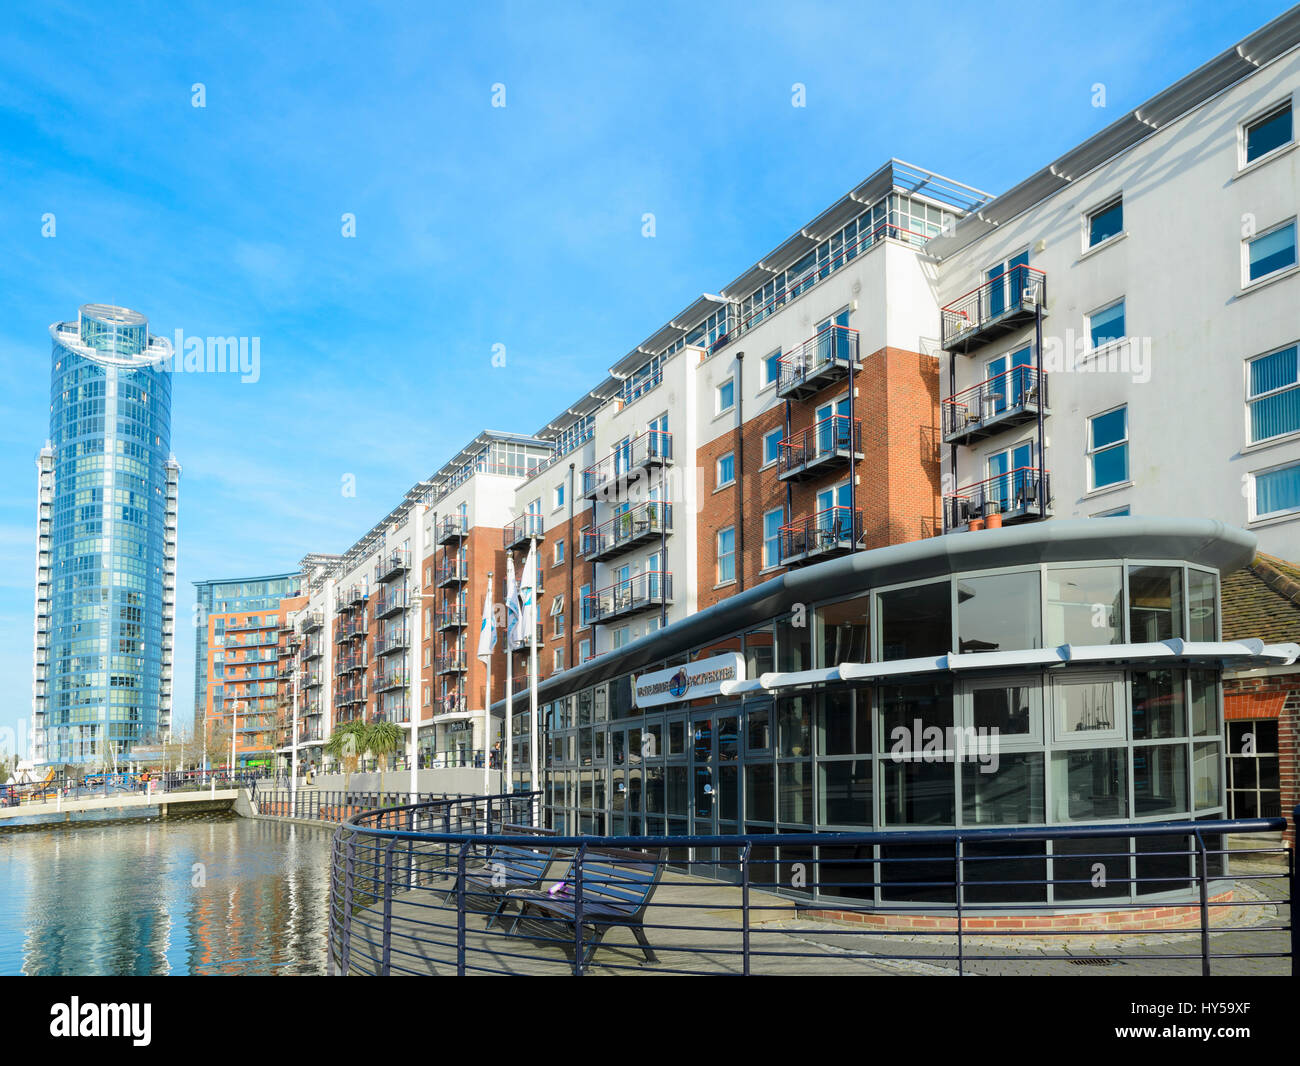 Gunwharf Quays Leisure Complex, Portsmouth, England, UK - a modern urban renewal / redevelopment project. Modern residential apartments Stock Photo